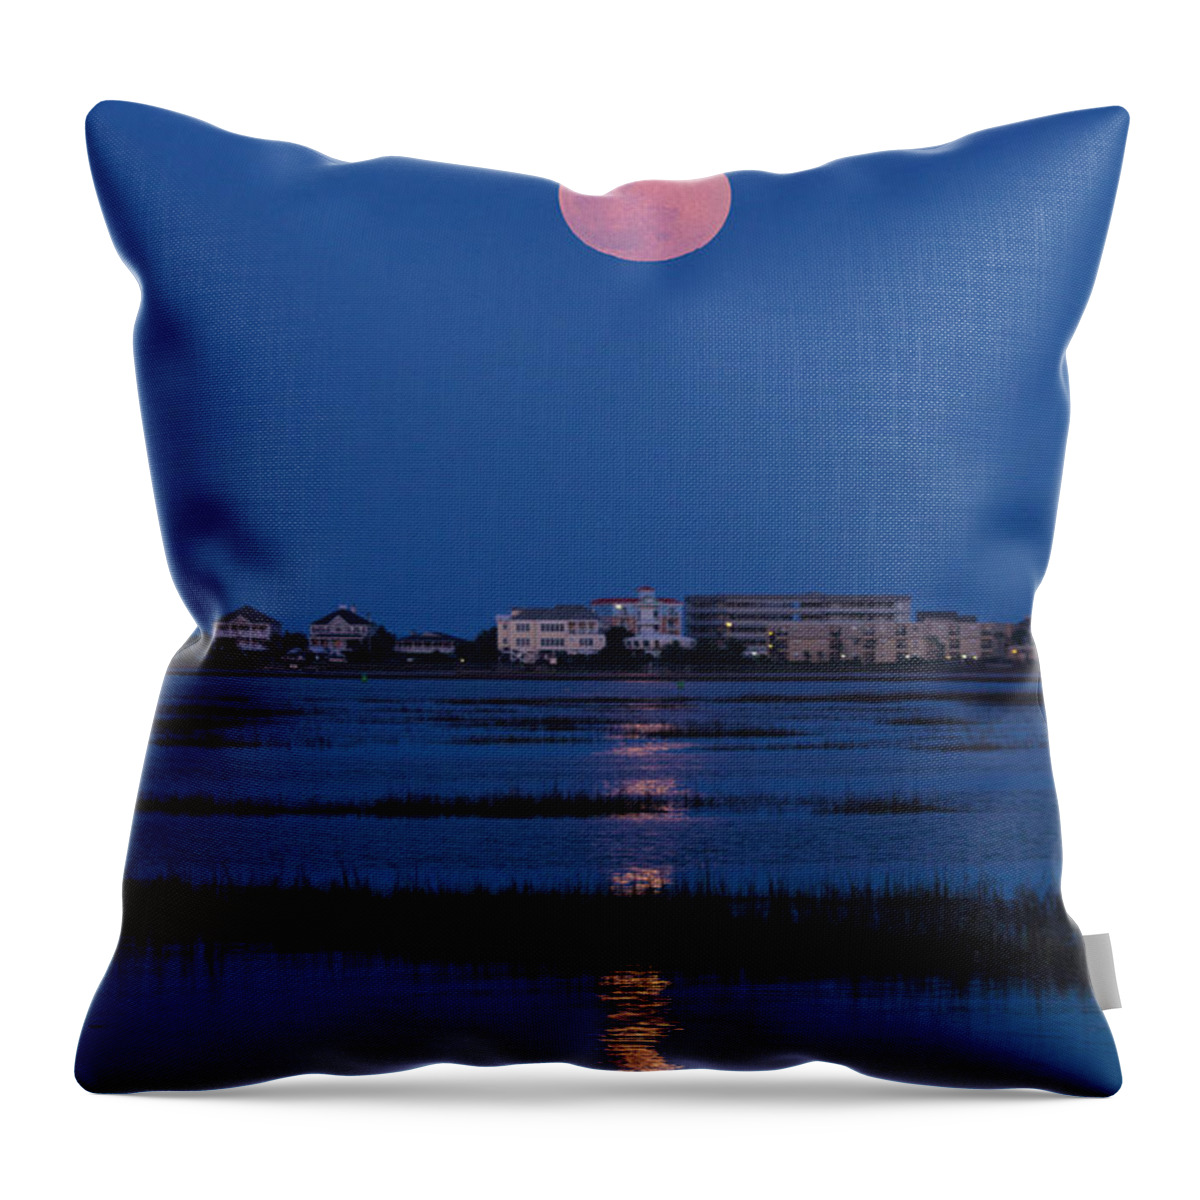 Moon Throw Pillow featuring the photograph Flower Moon Rising Over Murrells Inlet by Bill Barber